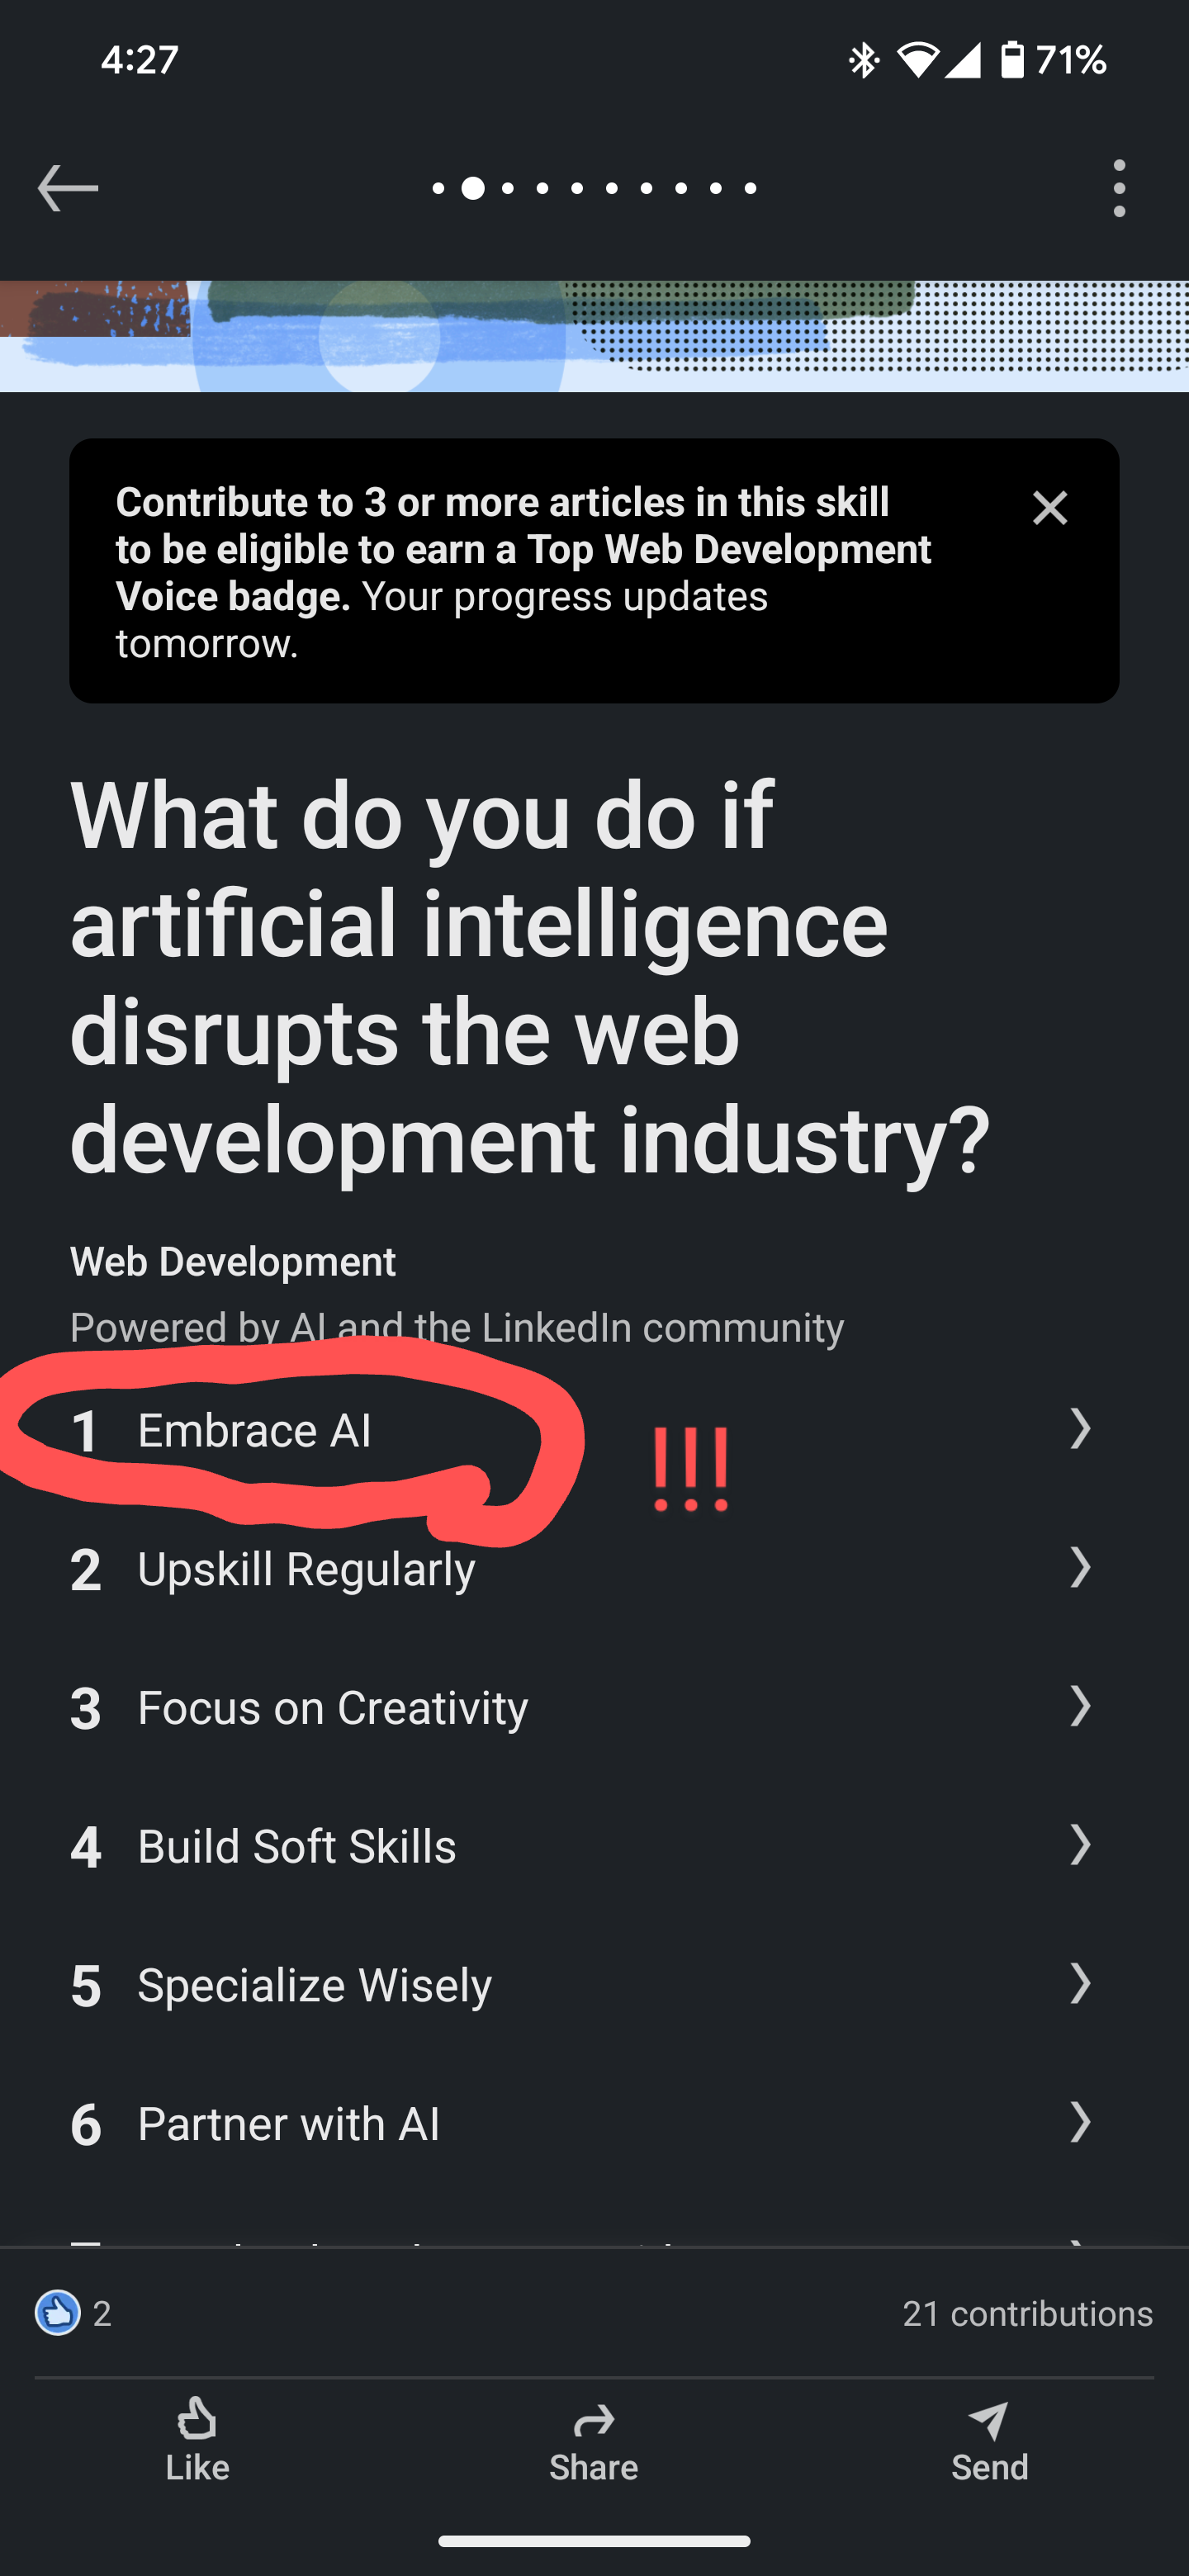 A screenshot showing the question "what do you do if artificial intelligence disrupts the web industry?" With the top answer being "Embrace AI"